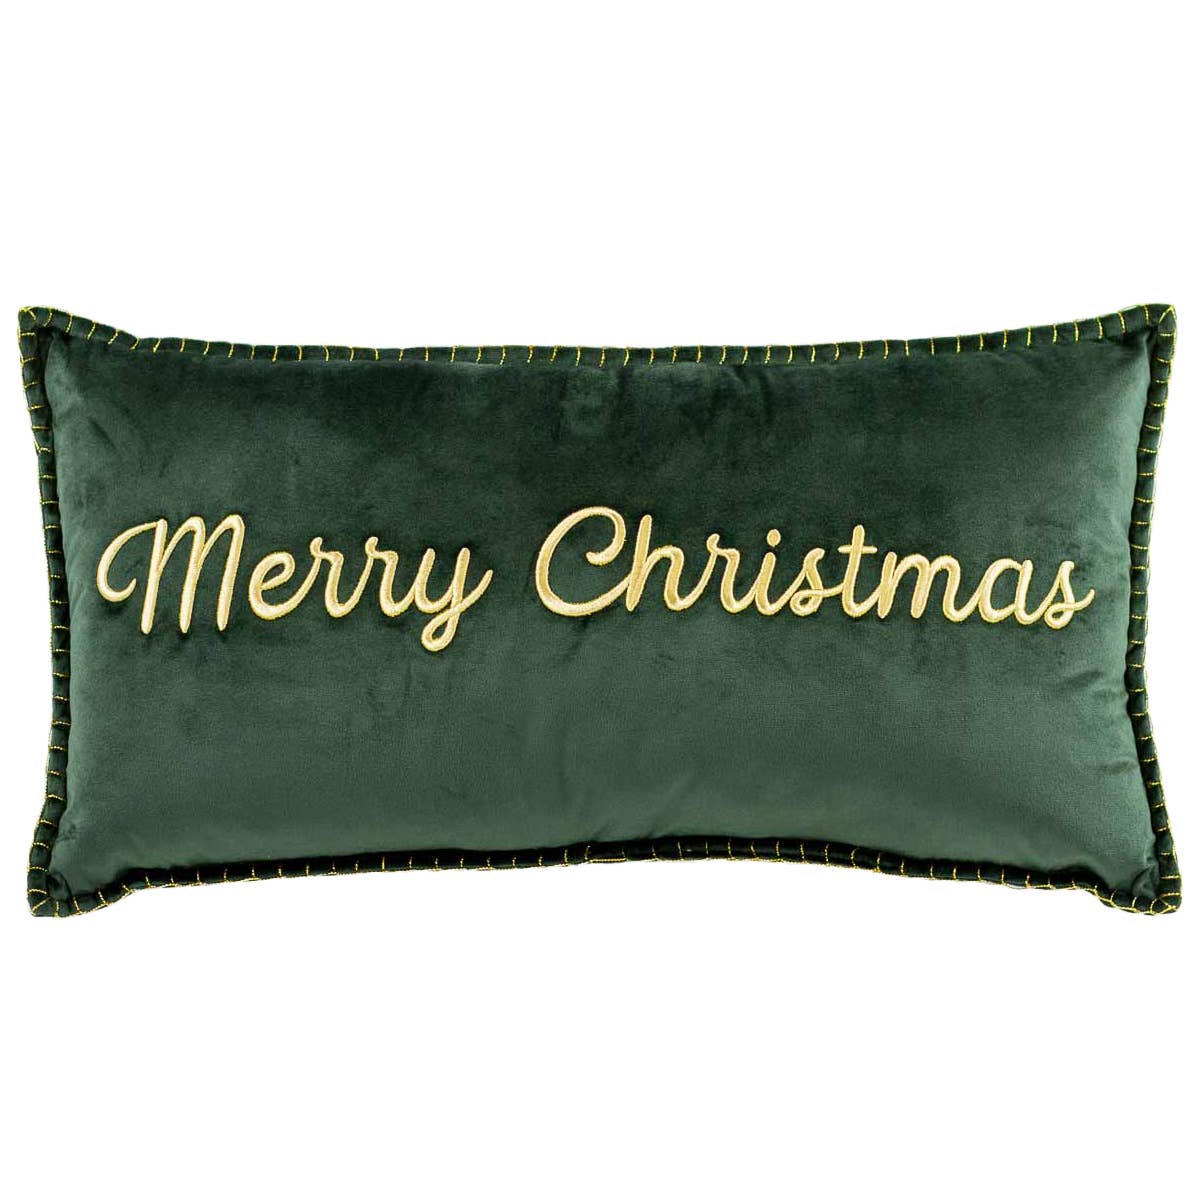 Merry Christmas Embroidered Pillow   Dark Green/Gold   13x24